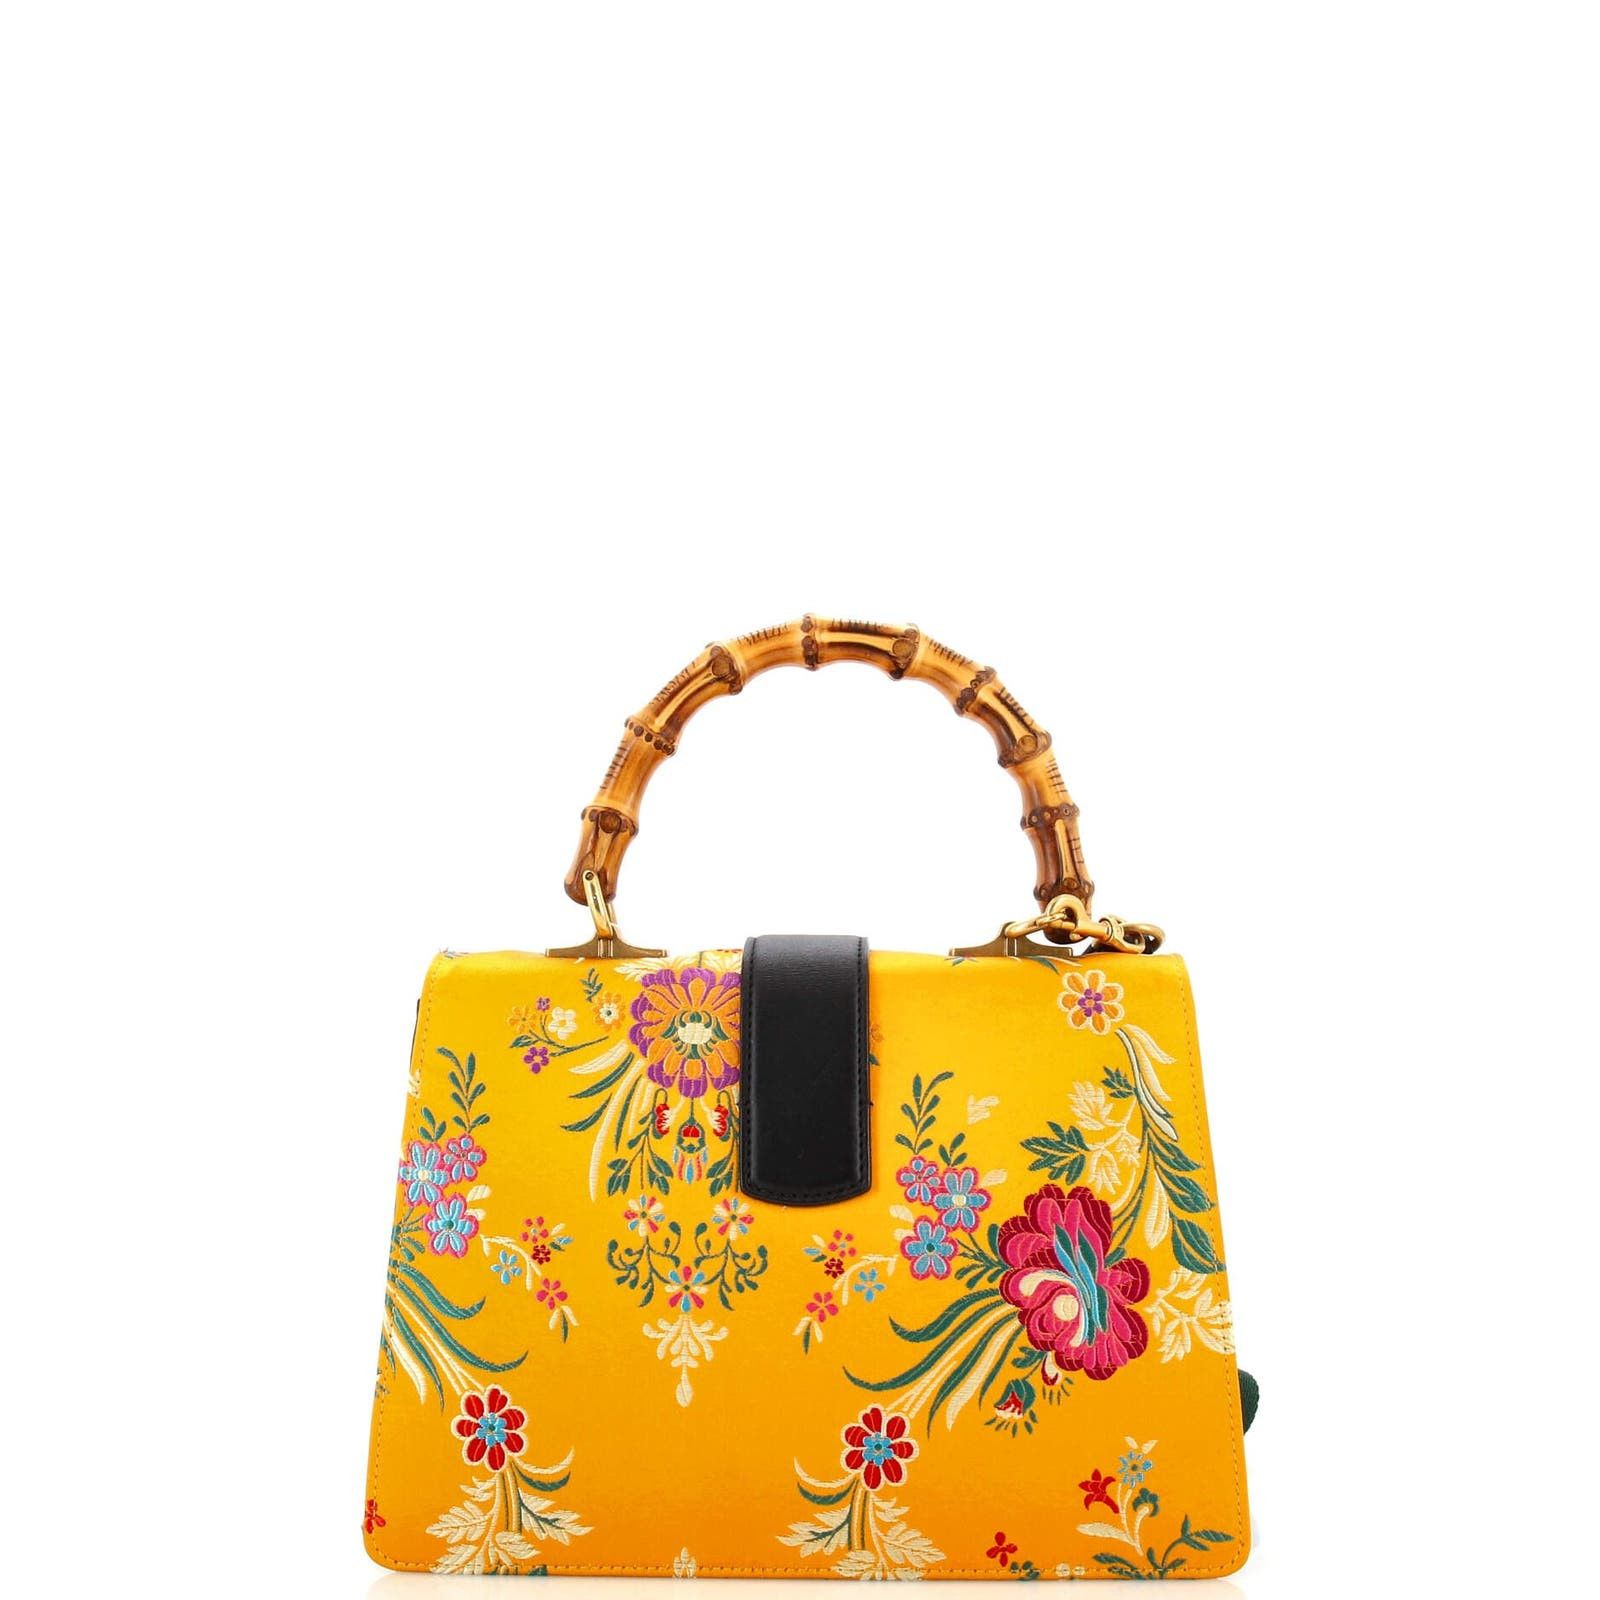 Gucci Dionysus Bamboo Top Handle Bag Floral Jacquard with Leather Size ONE SIZE - 3 Thumbnail